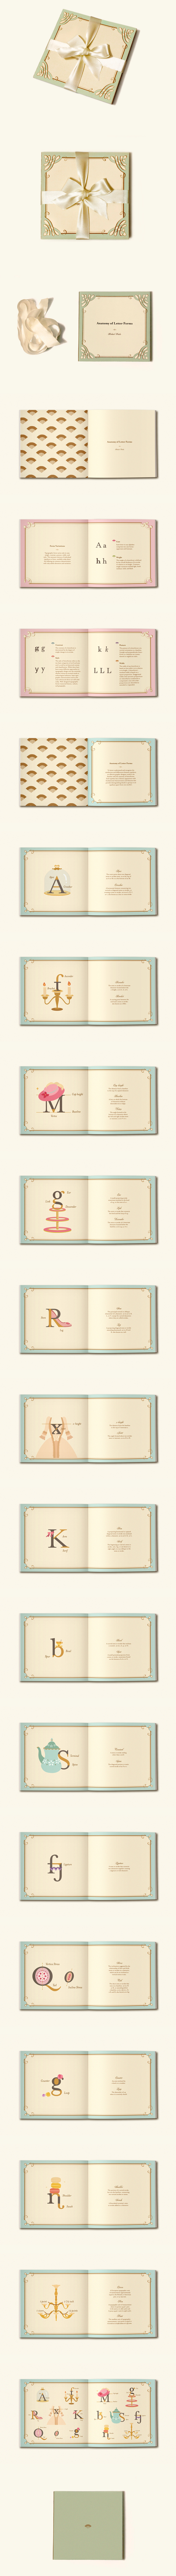 book design European French france book ribbon type editorial print publication